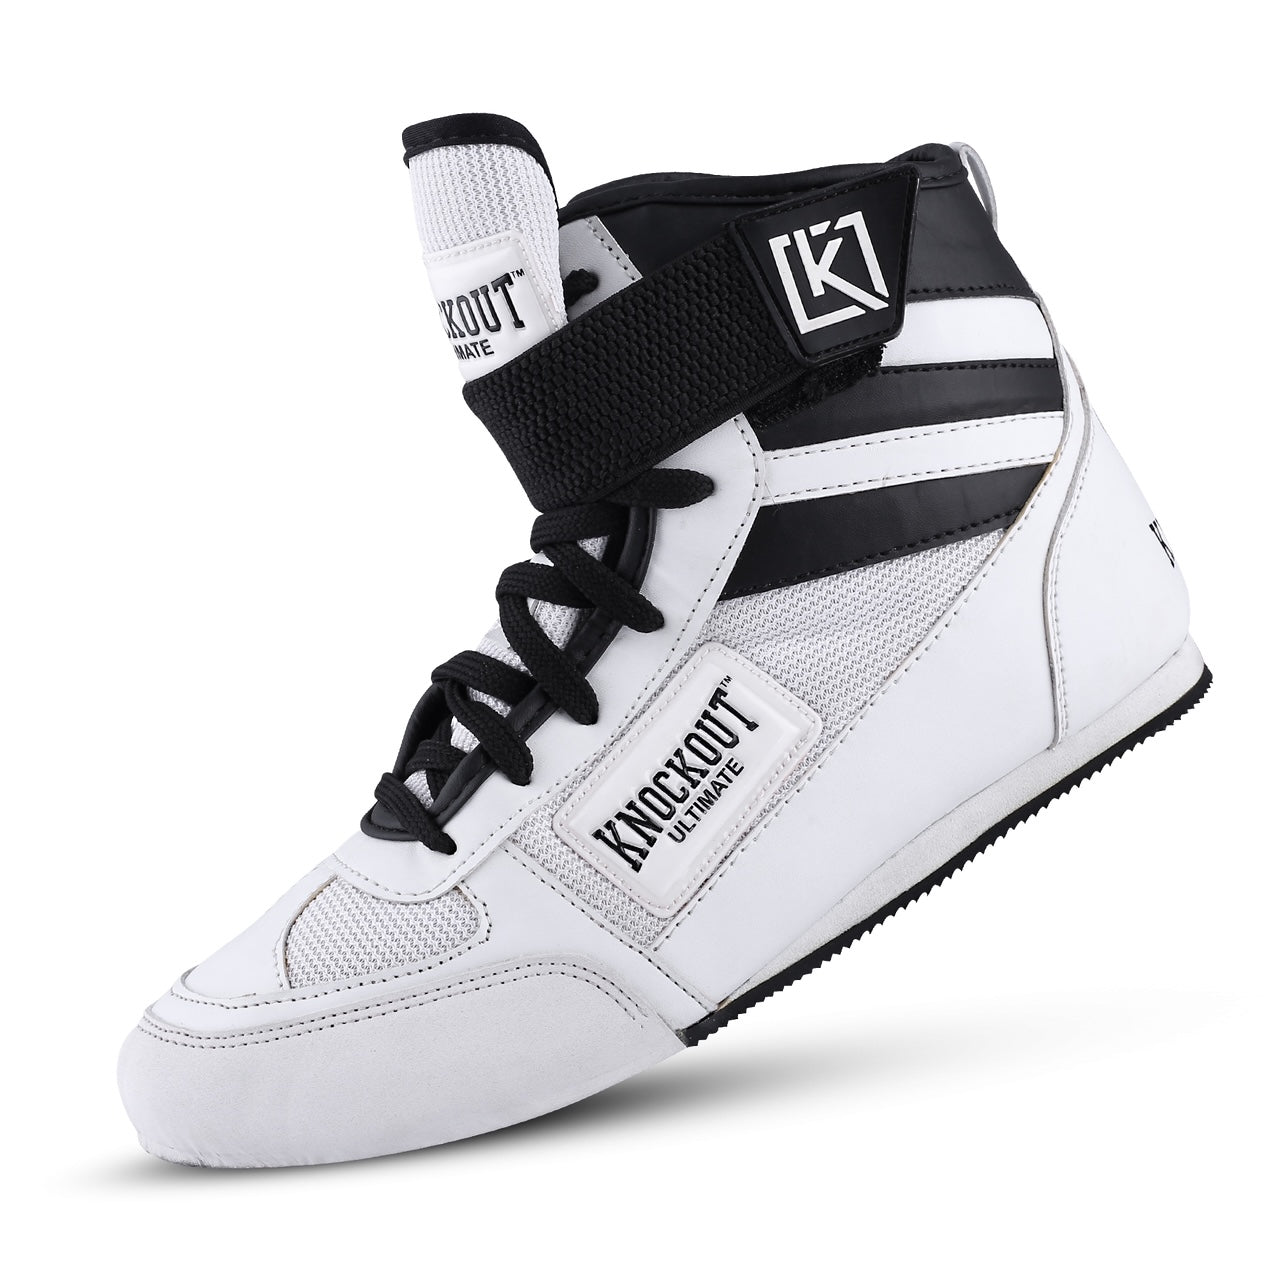 Boxing Shoes Lightweight, Breathable with Anti-Slipping Poly Rubber Sole and Extra Ankle Support for Boxers